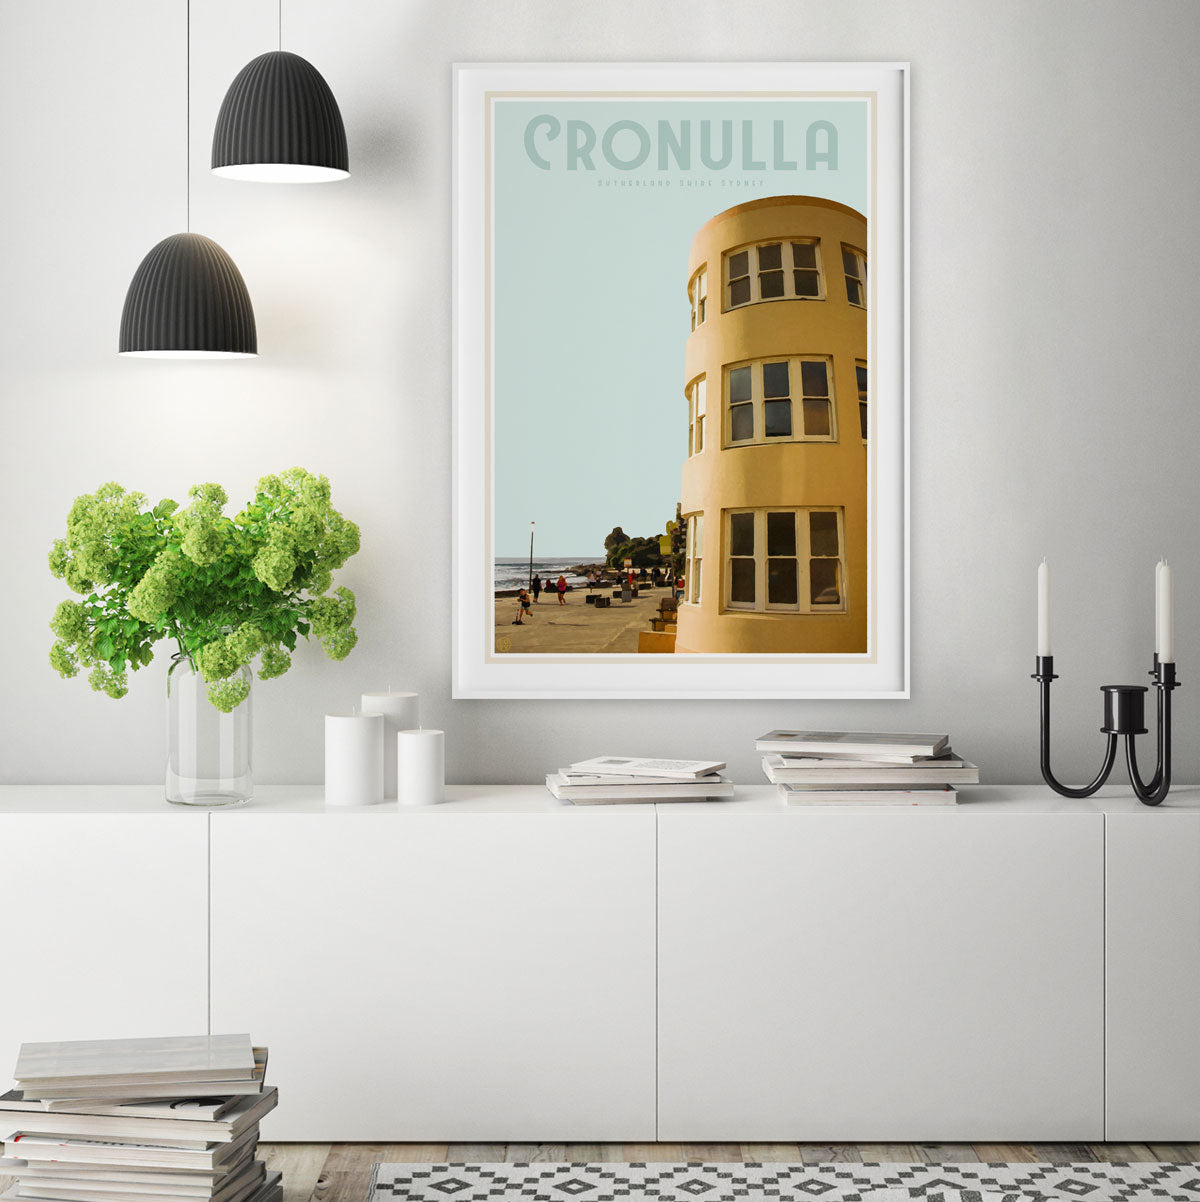 Cronulla surfclub vintage travel style poster by places we luv